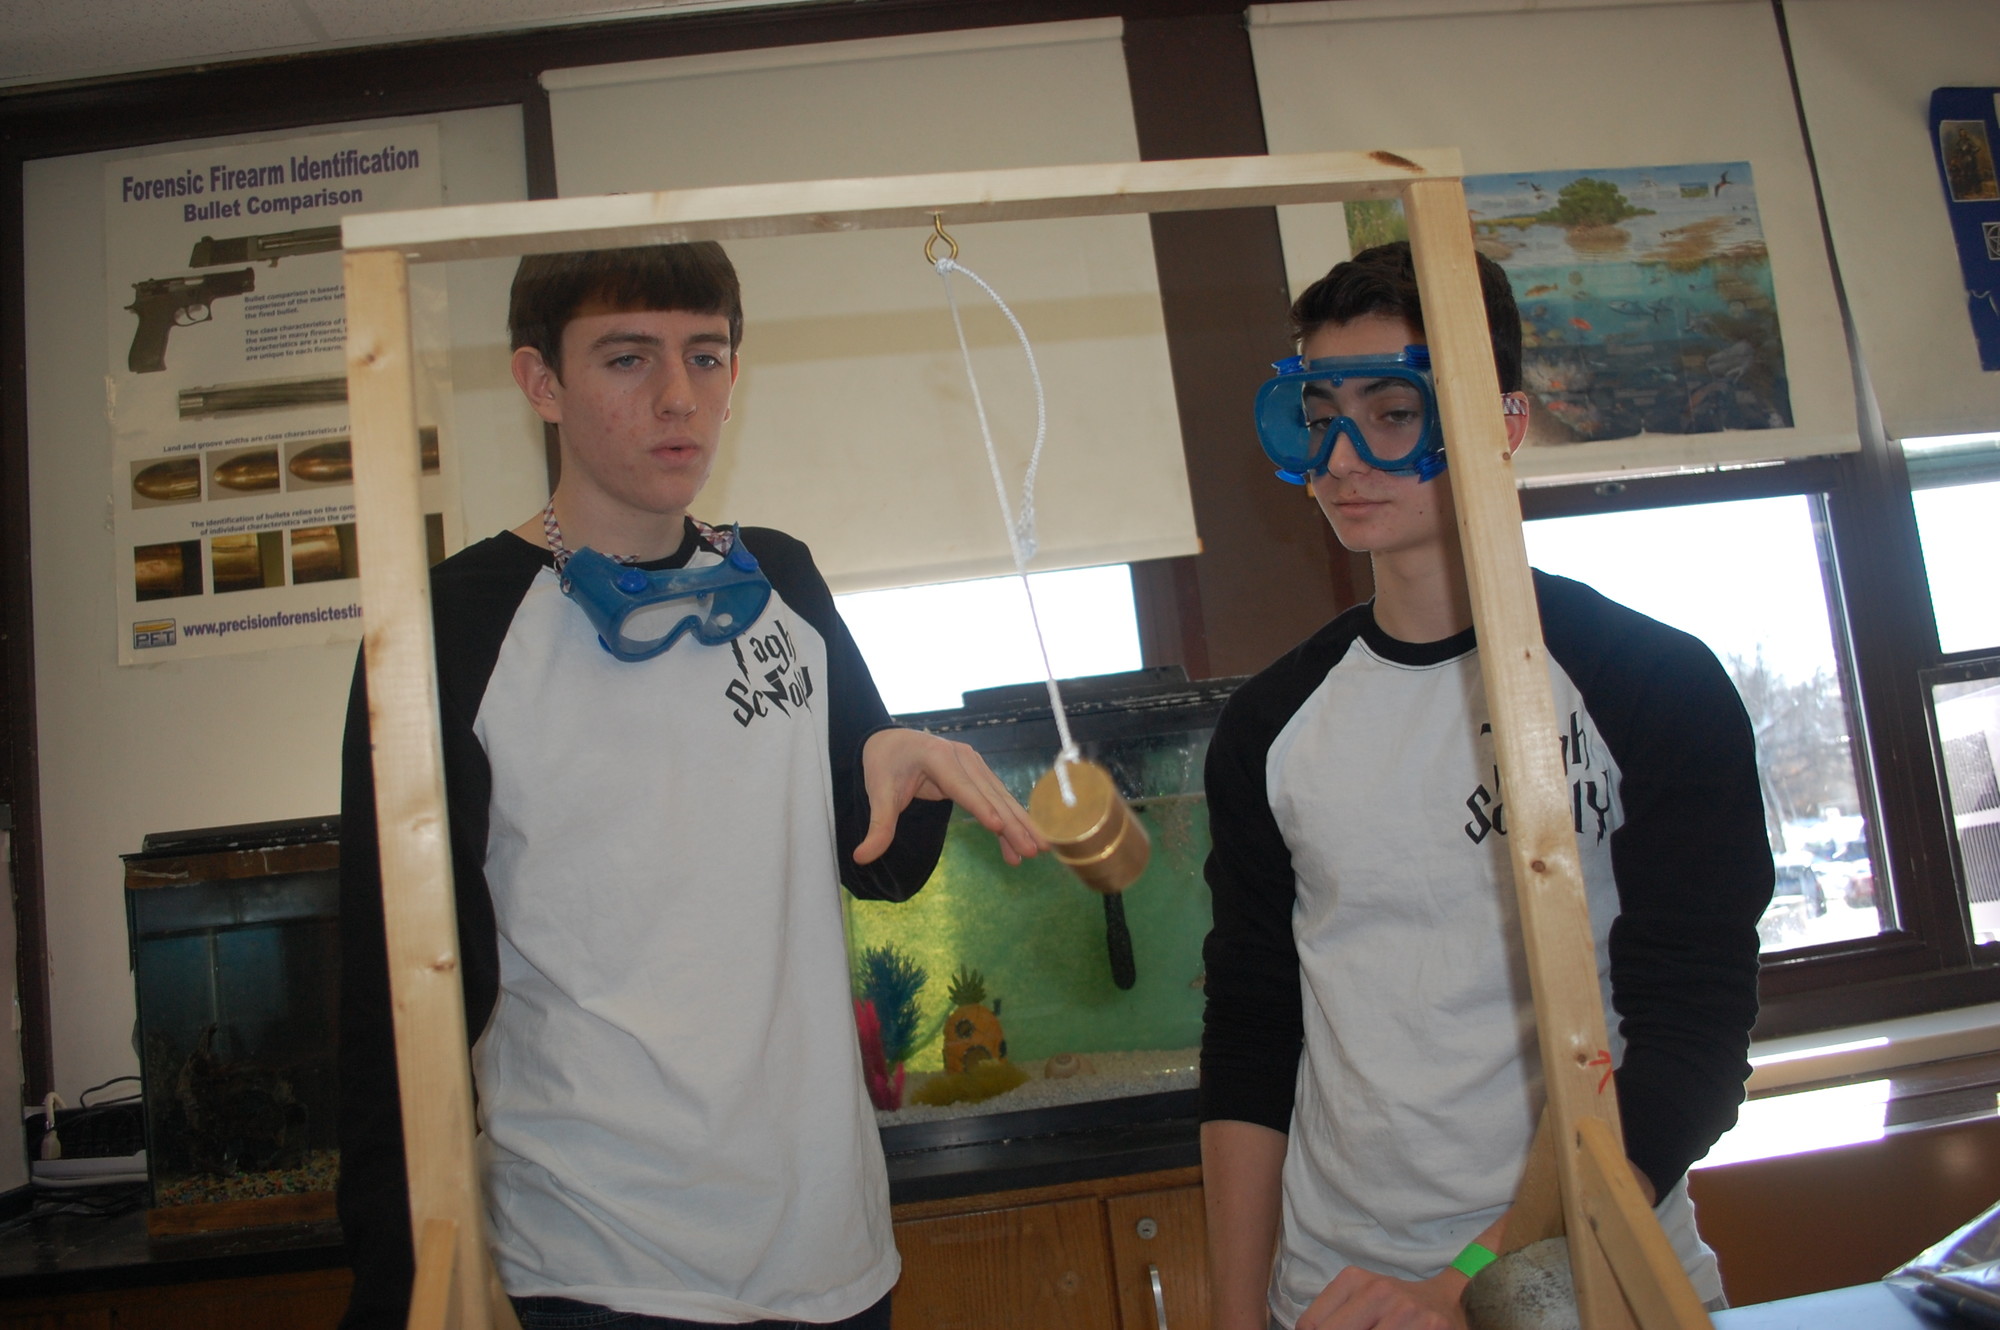 Wantagh High School Science Olympiad members Brian Tretter, left, and Greg Westhoff participated in “It’s About Time.” The event tested their knowledge of time and their skill in building a timekeeping device.